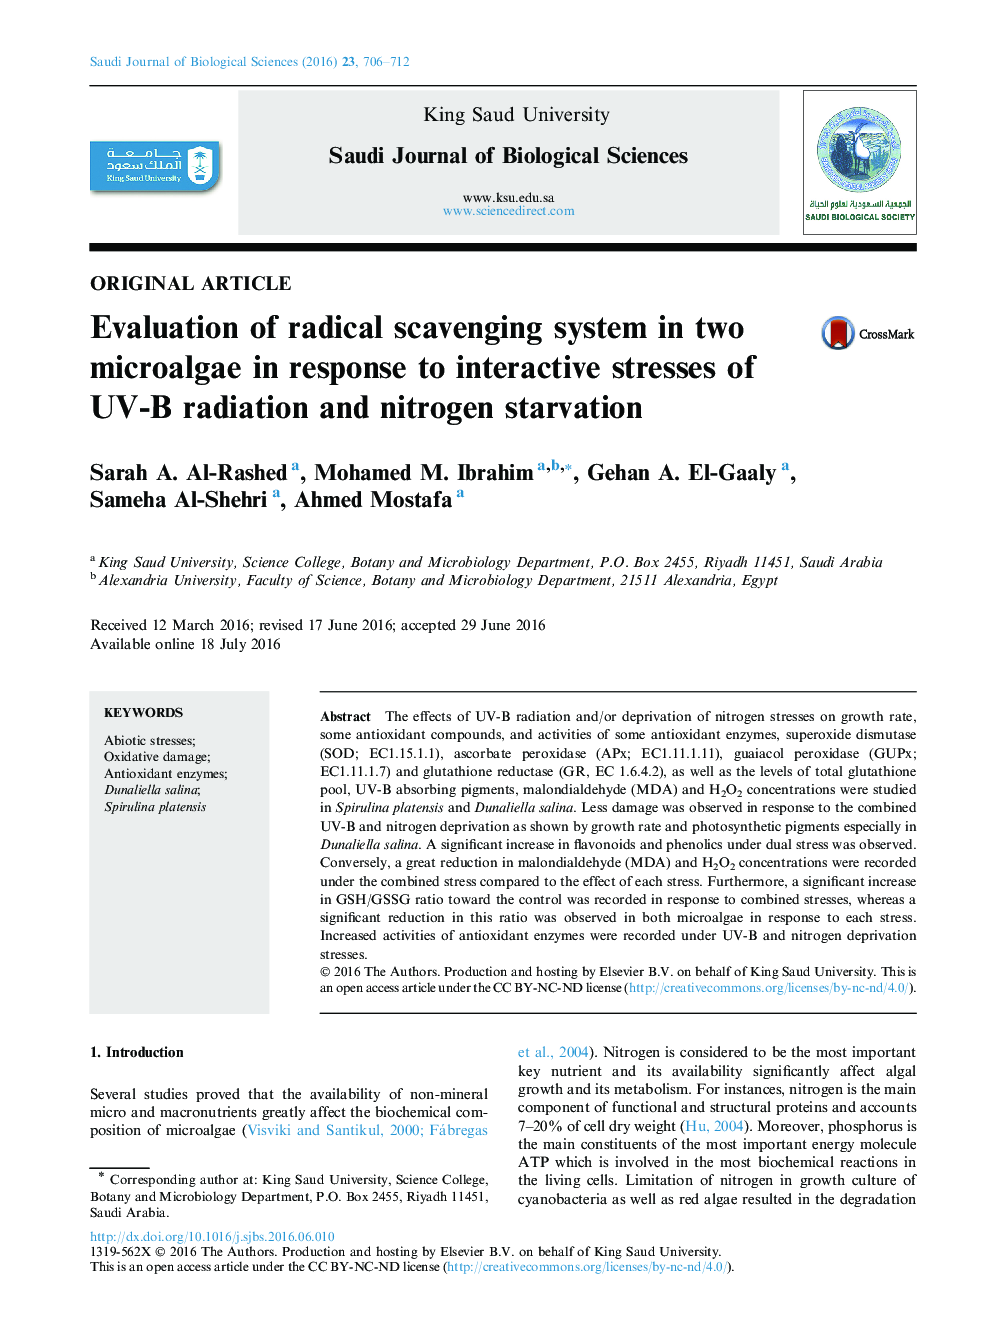 Original articleEvaluation of radical scavenging system in two microalgae in response to interactive stresses of UV-B radiation and nitrogen starvation